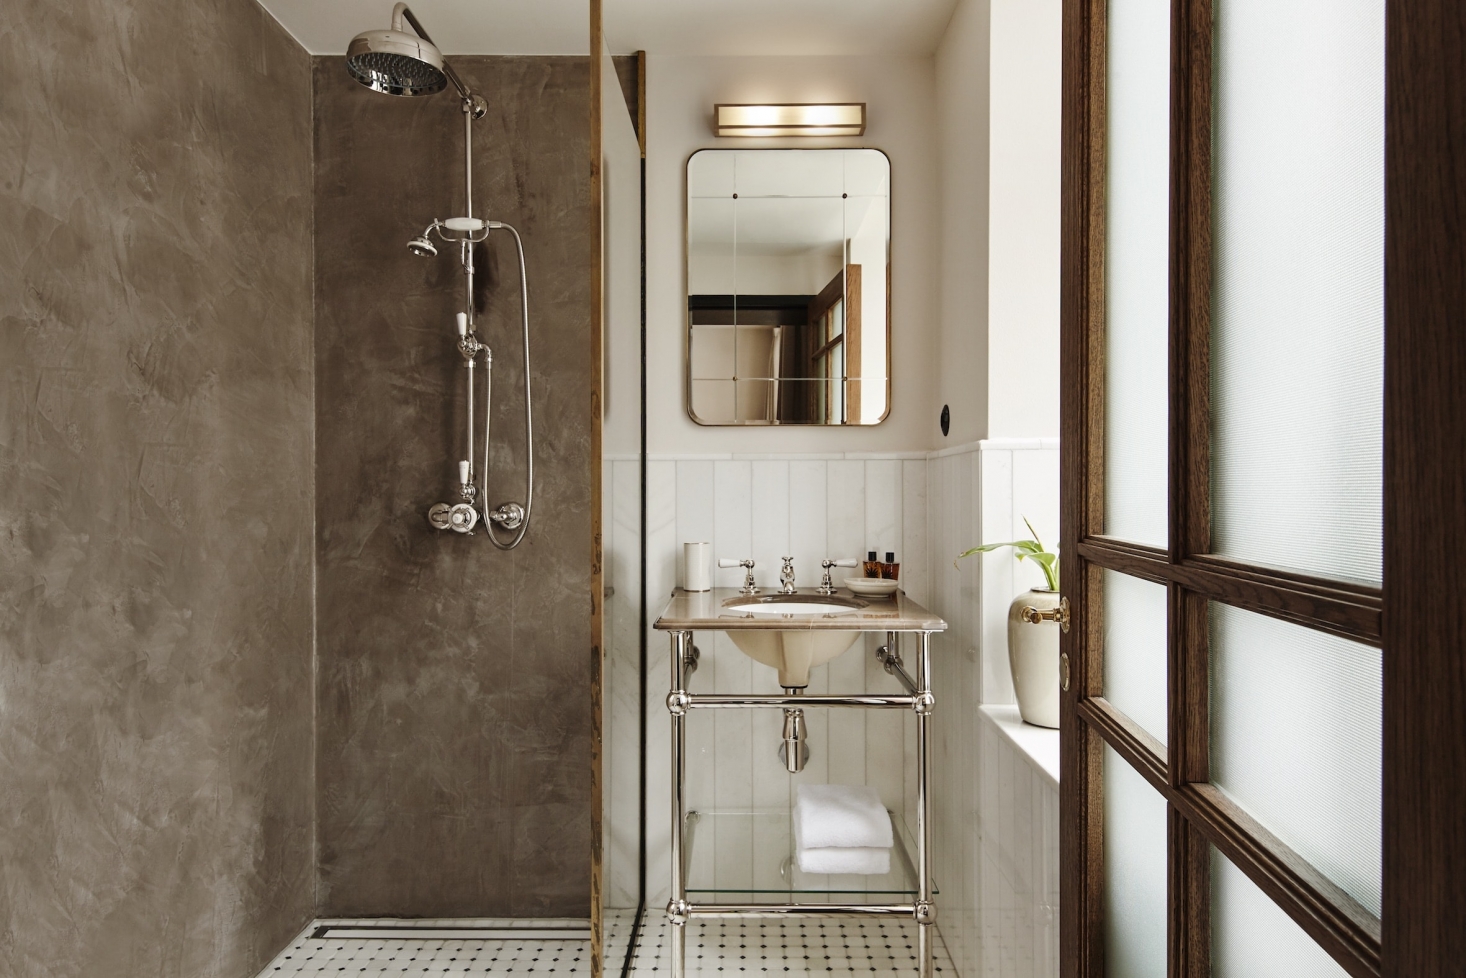 The shower walls are made of warm gray polished plaster and the tiles are all sourced from Greece; the vertically laid tiles are white Thassos marble. The pedestal sink is custom by Aquadomo in Denmark. Photograph courtesy of Lind & Almond.